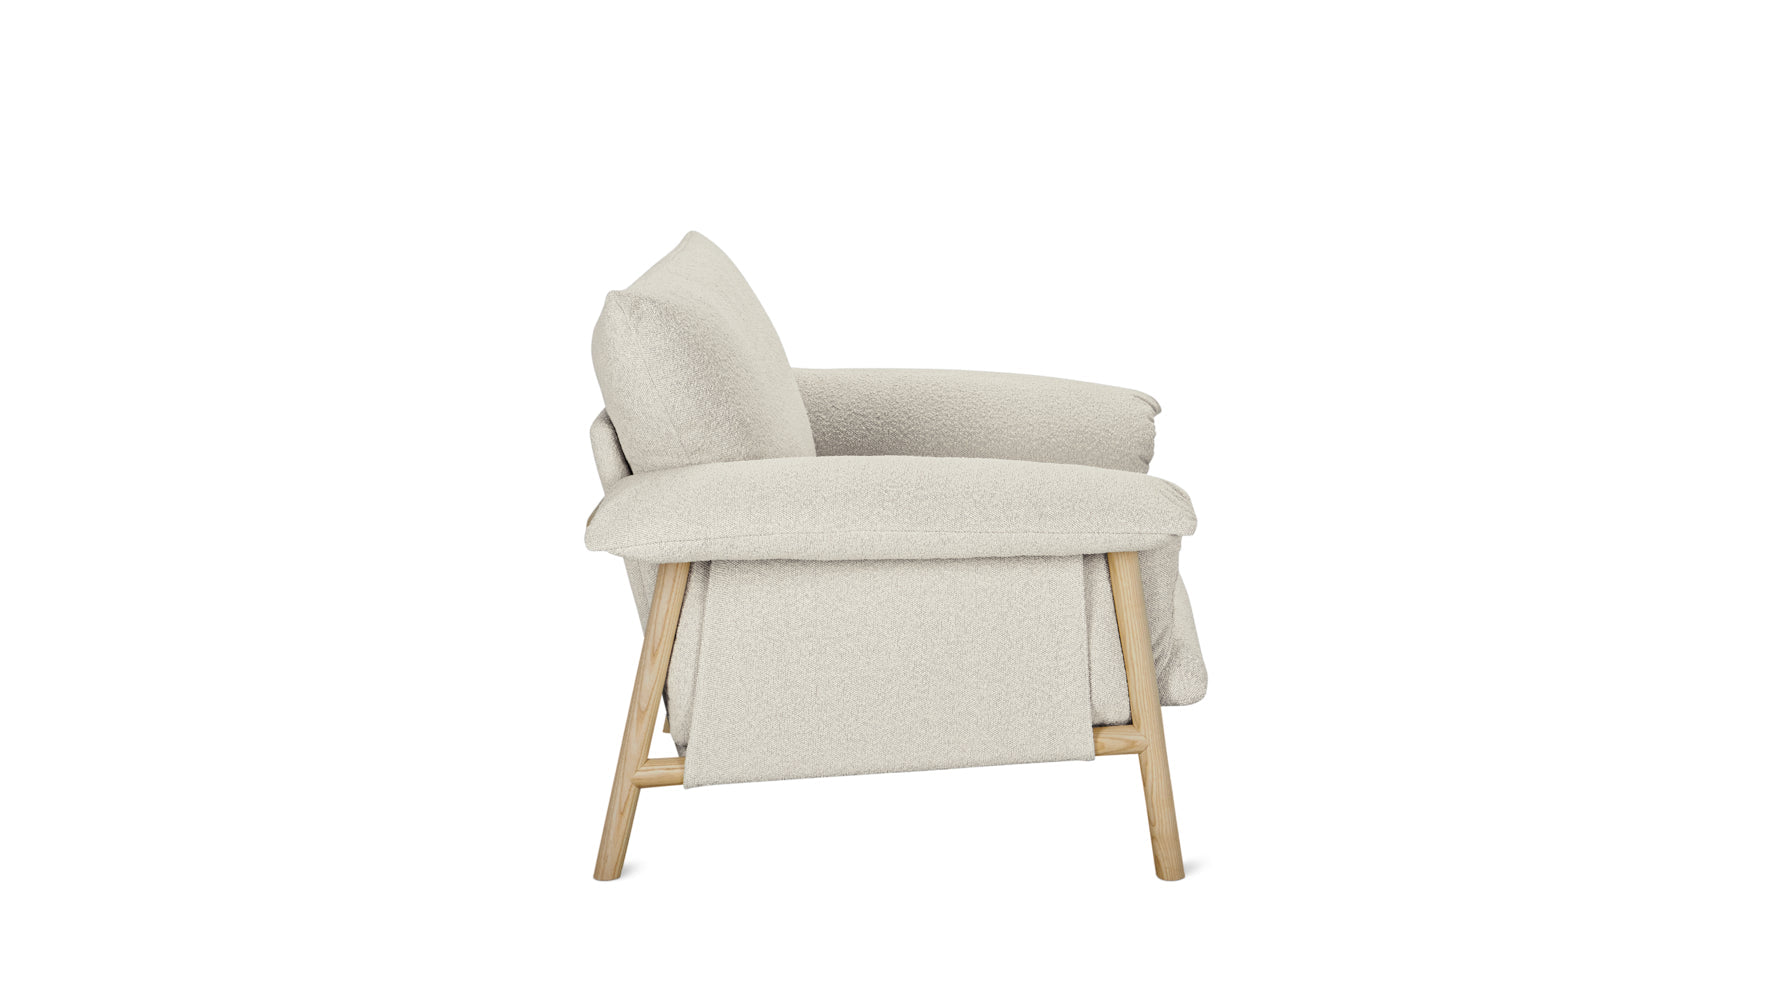 Pillow Talk Lounge Chair, Warm Frost - Image 3